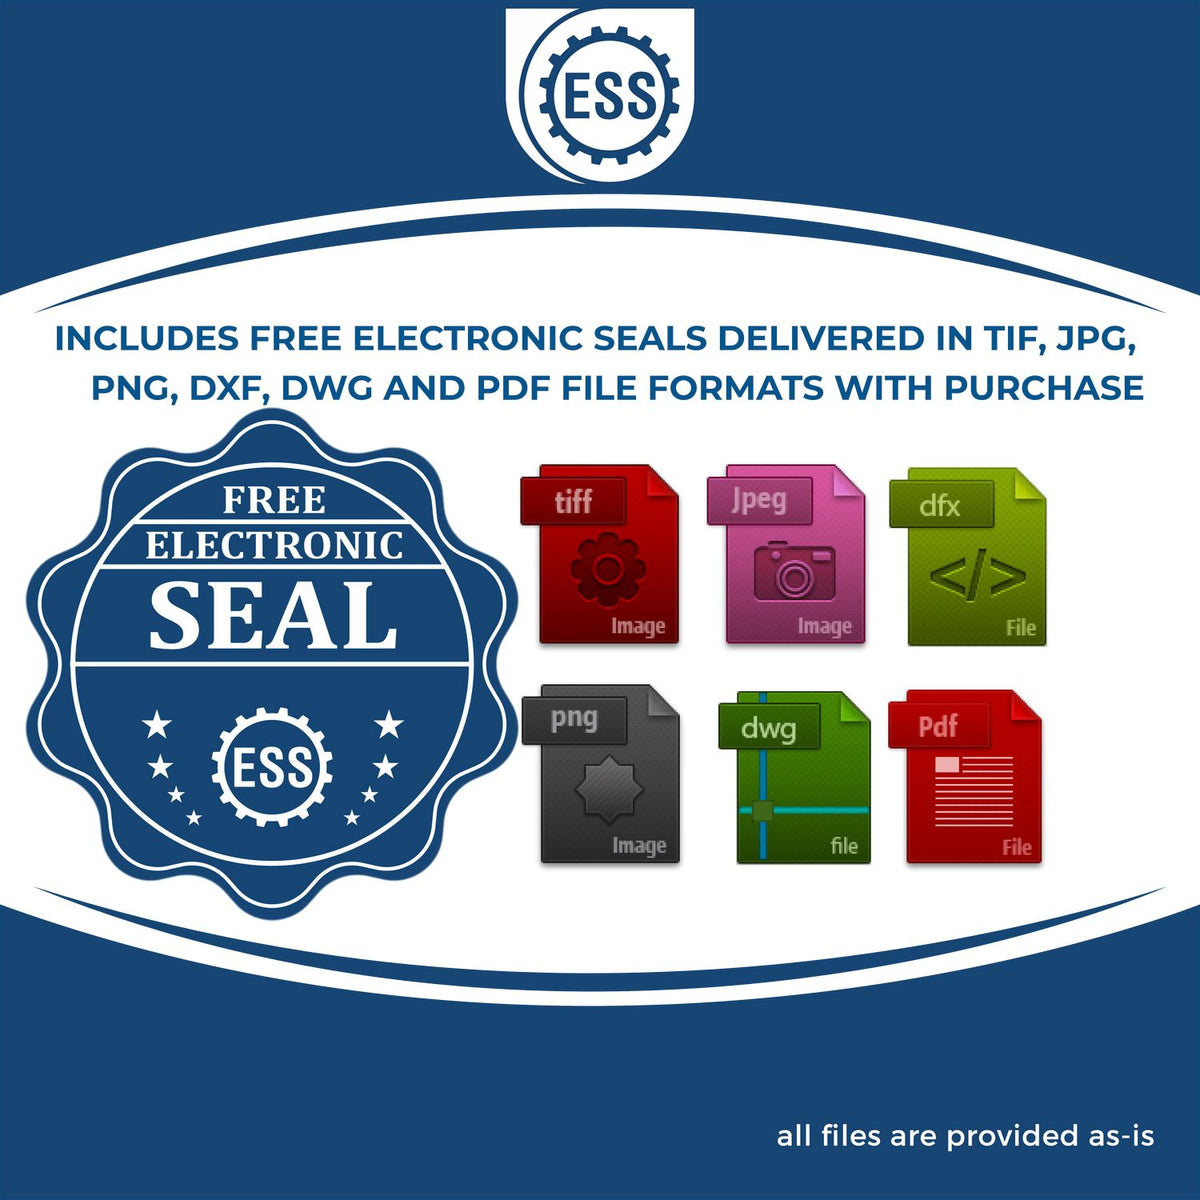 An infographic for the free electronic seal for the Extended Long Reach Connecticut Surveyor Embosser illustrating the different file type icons such as DXF, DWG, TIF, JPG and PNG.